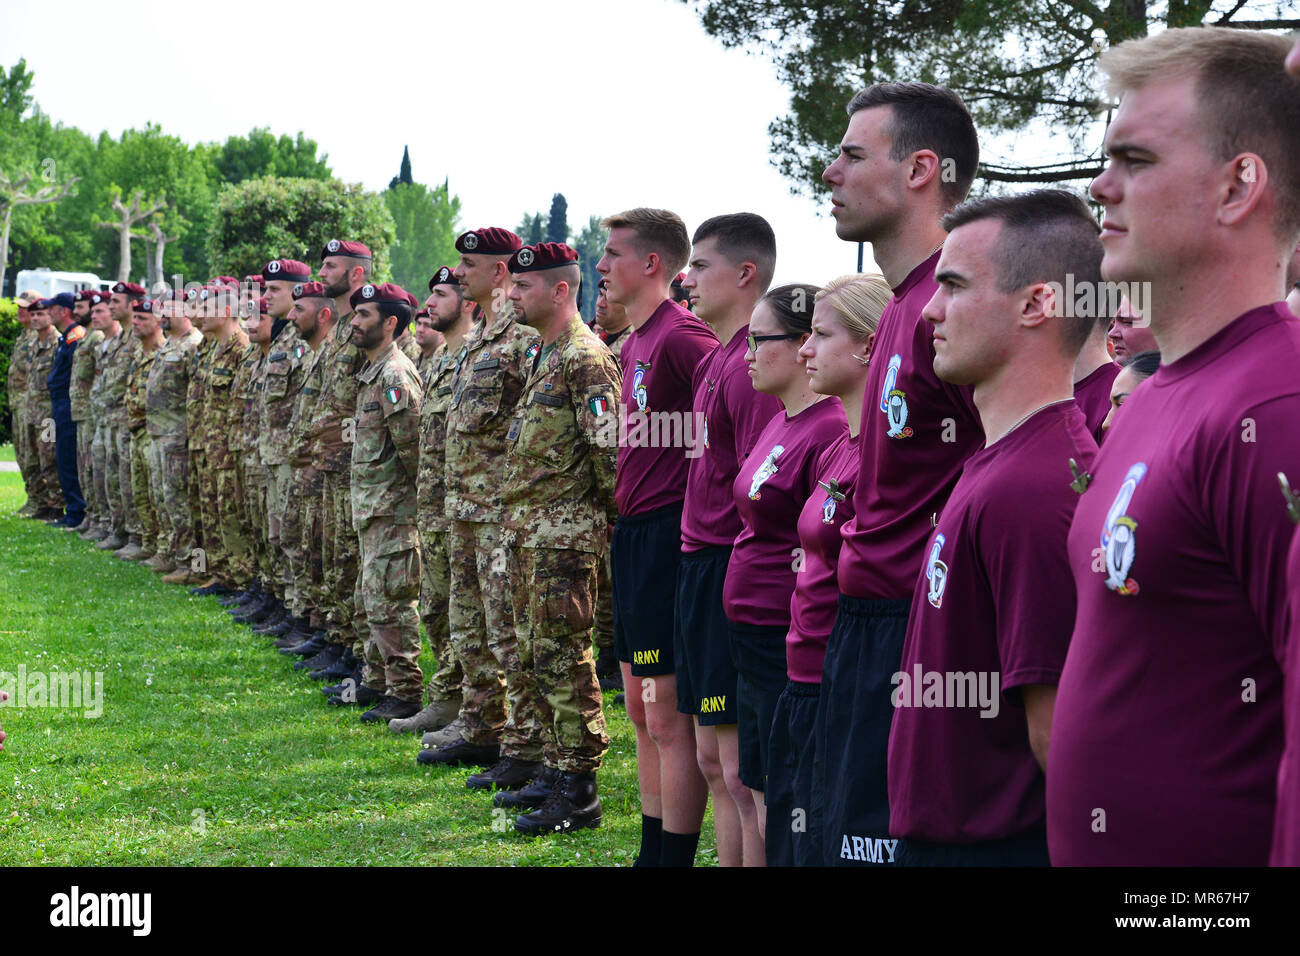 U.S. Army Paratroopers assigned to 1st Battalion, 503rd Infantry Regiment, 173rd Airborne Brigade, Italian Army Paratroopers from the 4th Regimento Paracadutisti Alpini and the Brigata Folgore, and Italian Army Lagunari soldiers during the closing ceremony at lake Garda near Pacengo, Italy, May 18, 2017.. (U.S. Army Photo by Visual Information Specialist Paolo Bovo/Released) Stock Photo